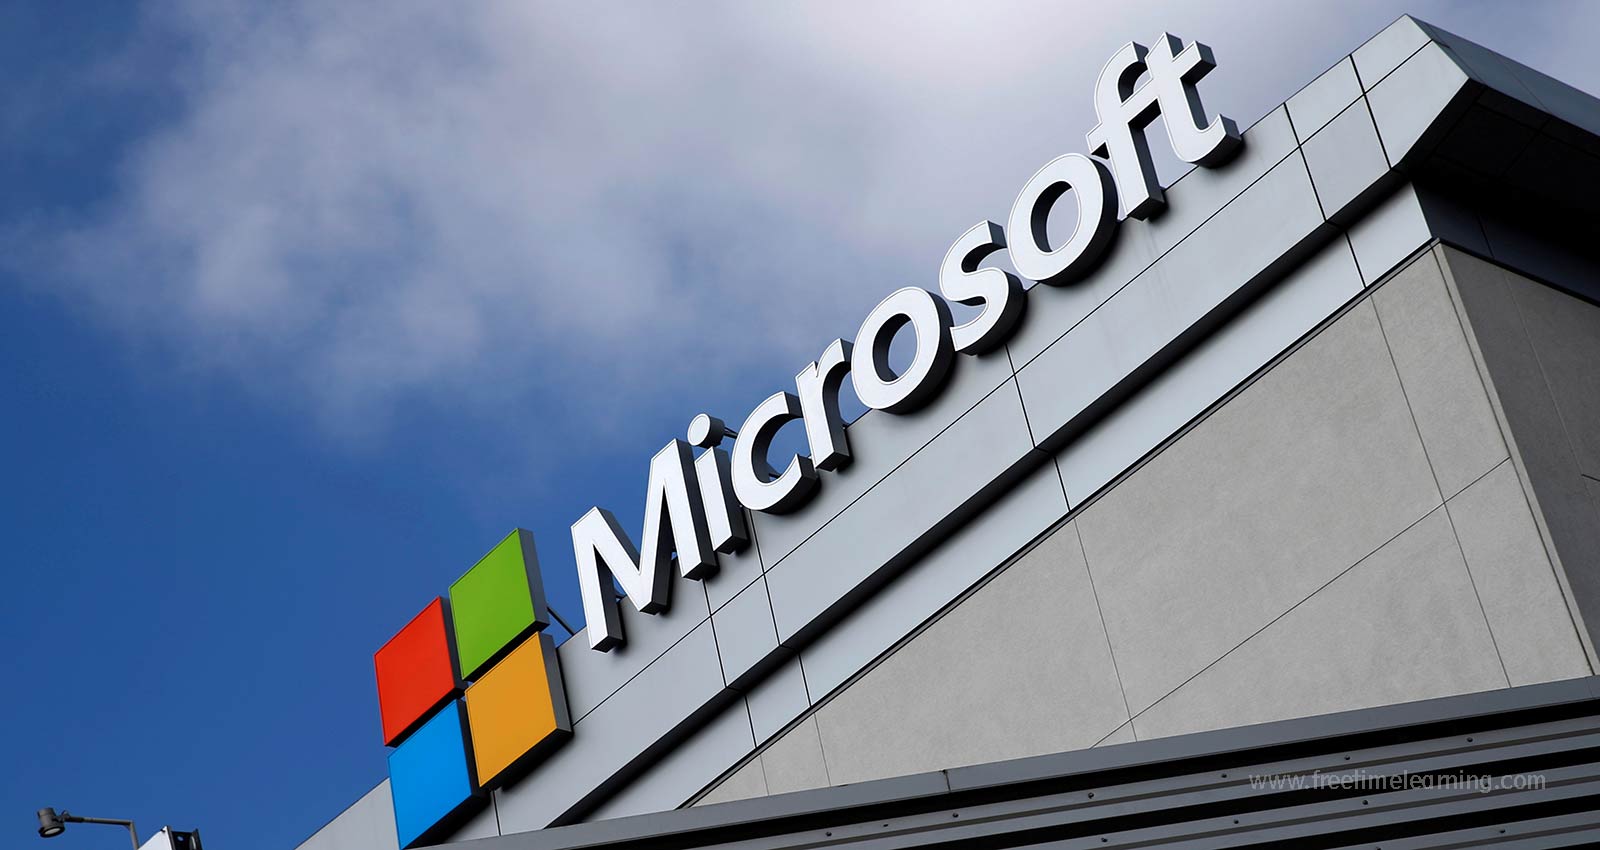 Microsoft Introduced New Computing Service, Aims to R&D